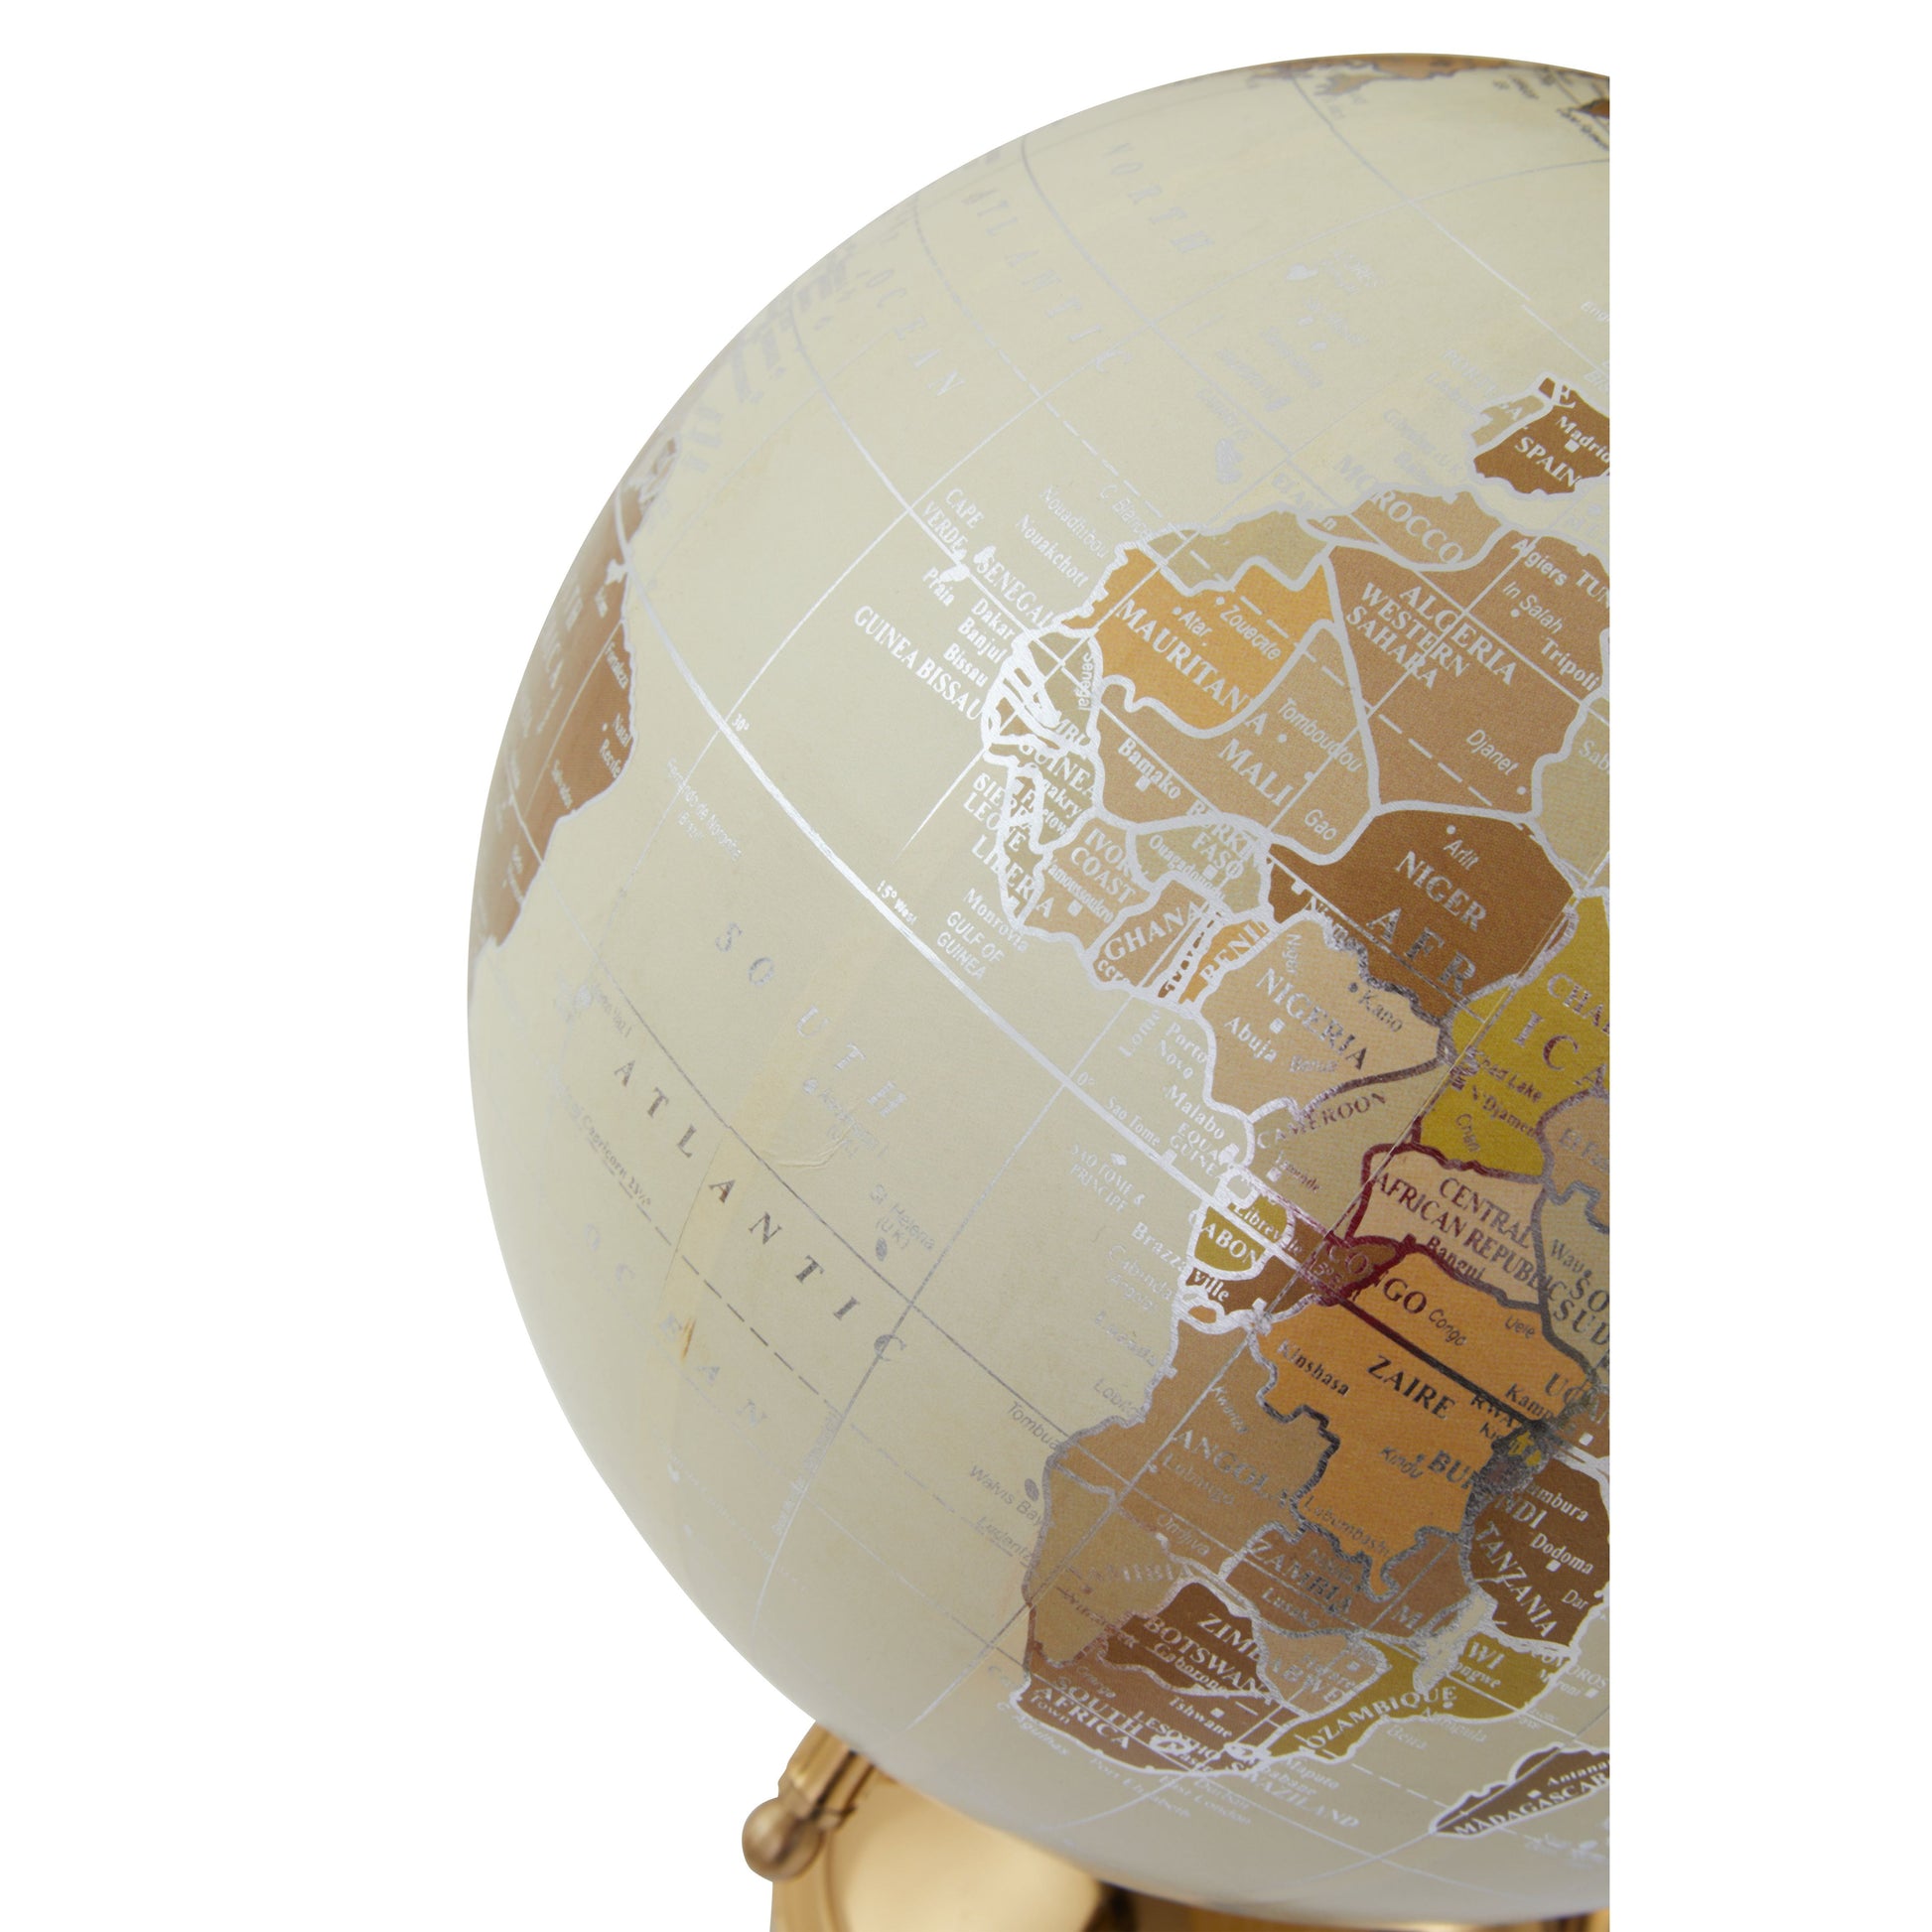 The Travellers Globe, Black & Silver or Cream & Gold, Polished Metallic Finish - The Happy Den